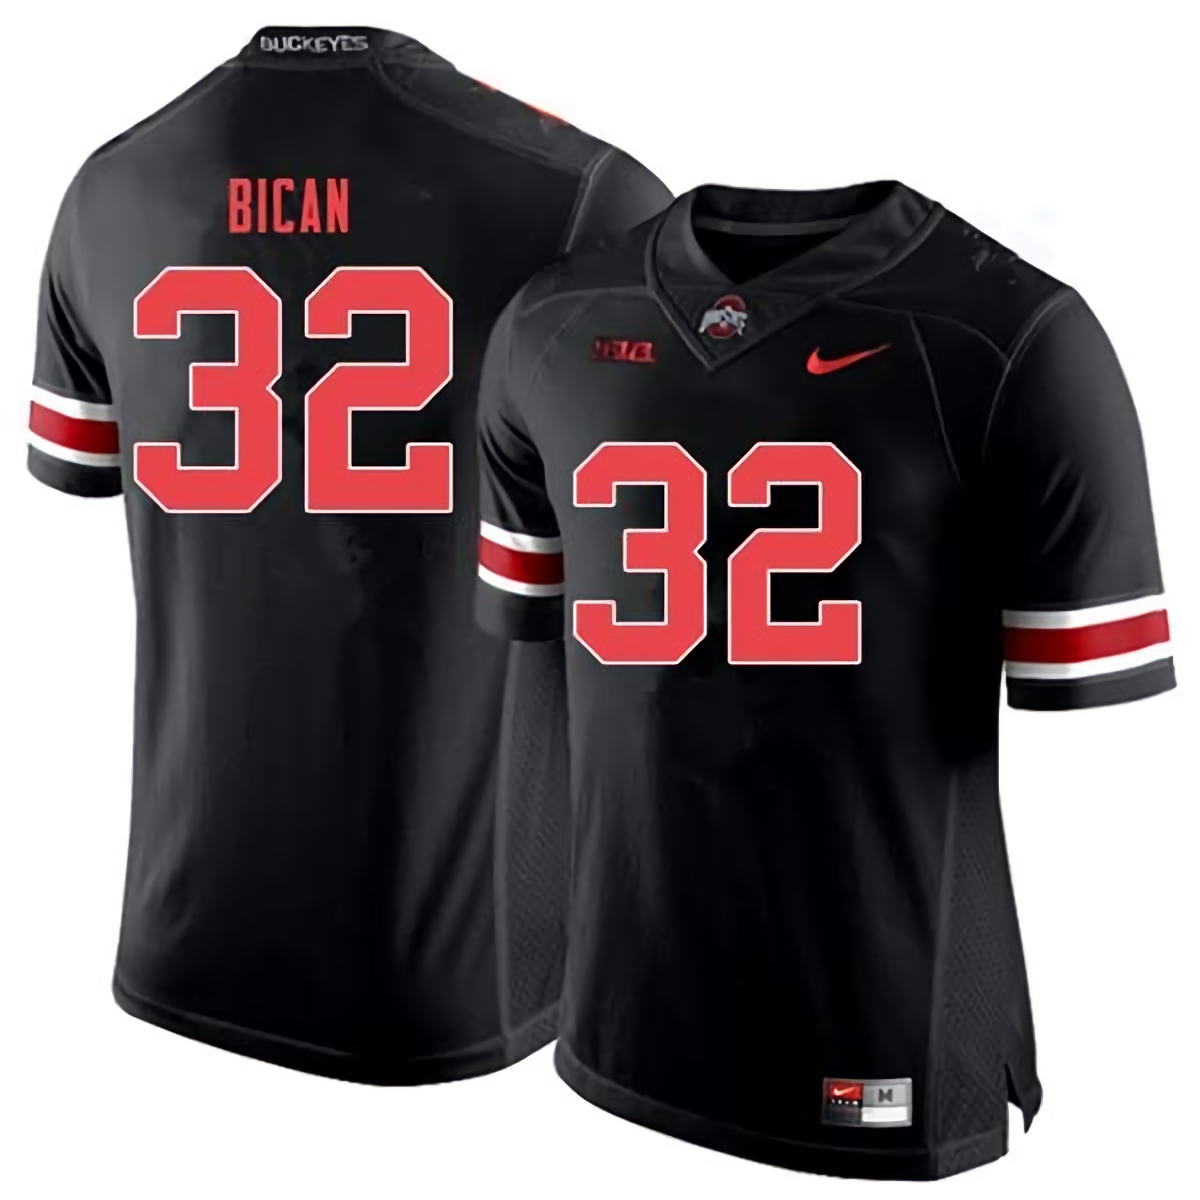 Luciano Bican Ohio State Buckeyes Men's NCAA #32 Nike Black Out College Stitched Football Jersey PXQ1356BS